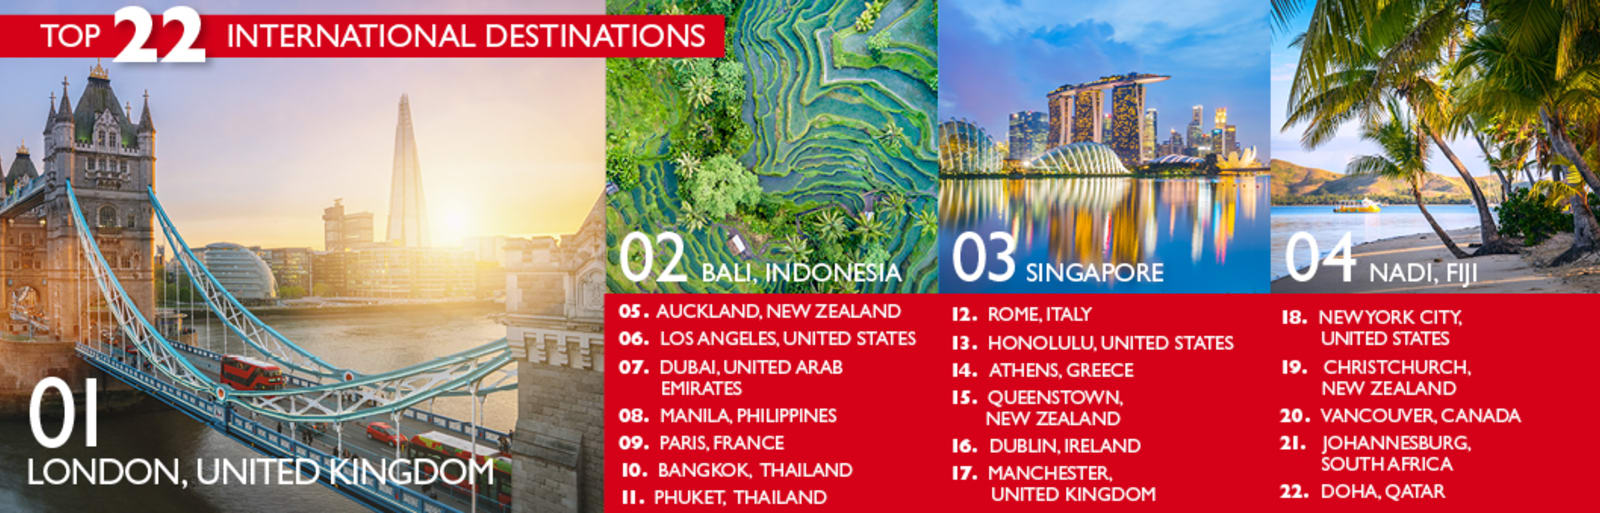 Table listing the top 22 international travel destinations of 2022. Tower Bridge in London, rice fields in Bali, Singapore skyline and beach in Fiji